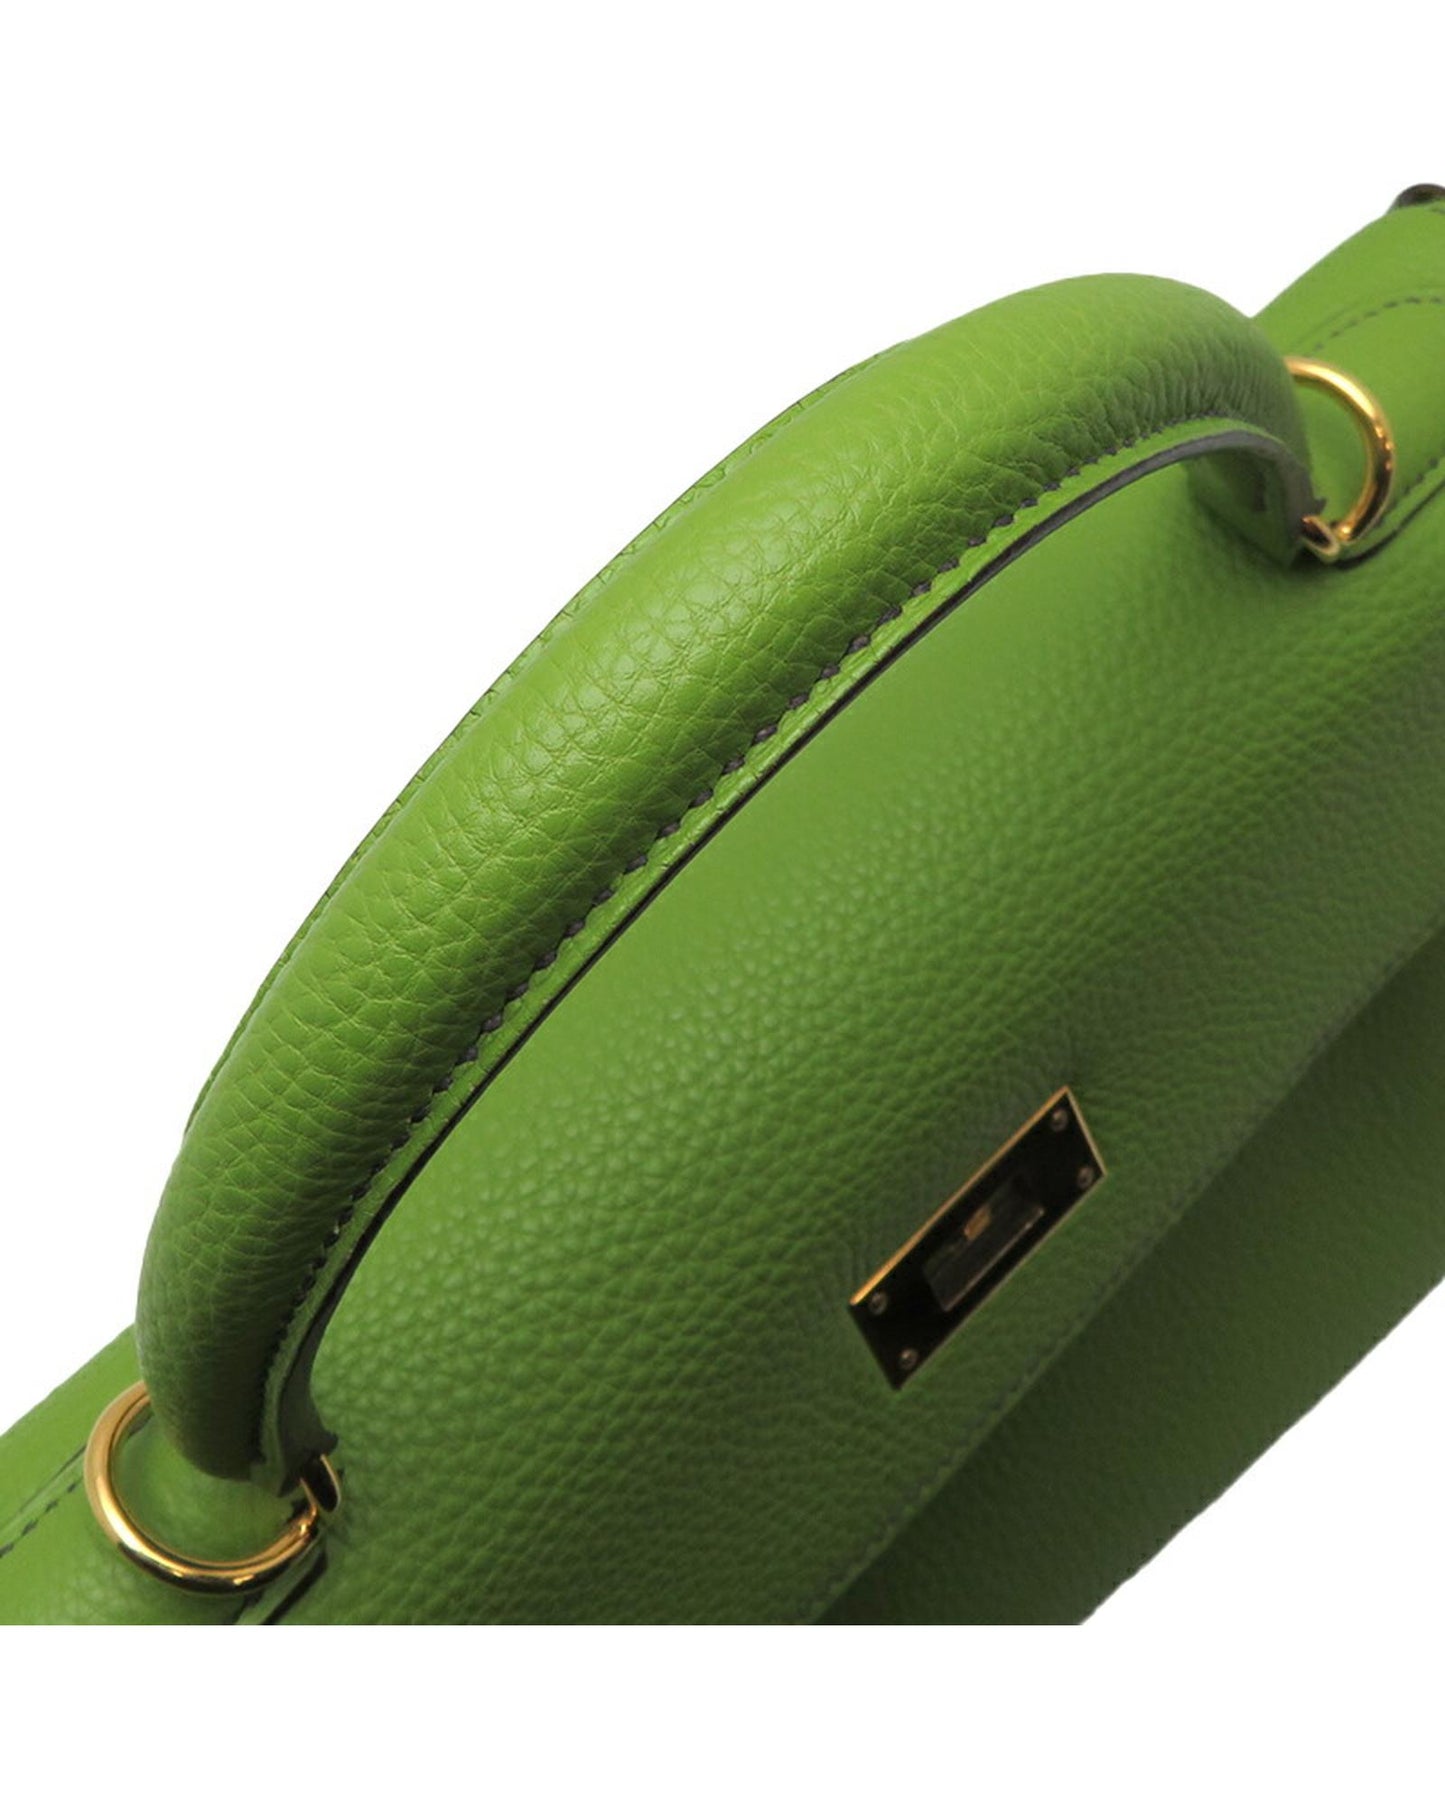 Hermes Women's Green Clemence Kelly 28 Bag in A Condition in Green